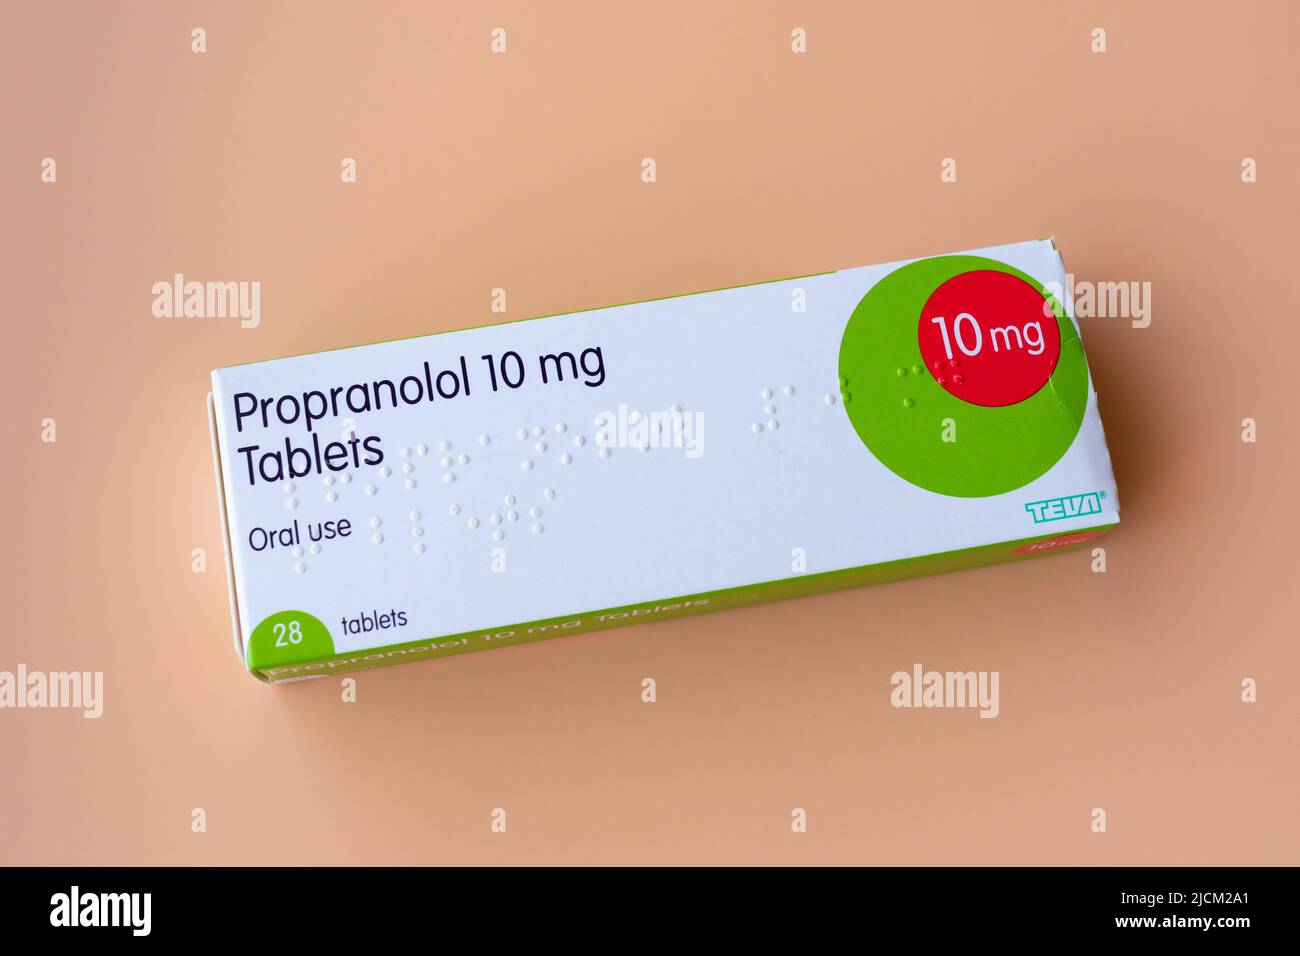 Box of Propranolol 10 mg tablets, a Beta blocker used to treat high blood pressure, heart problems, tremors & anxiety Stock Photo